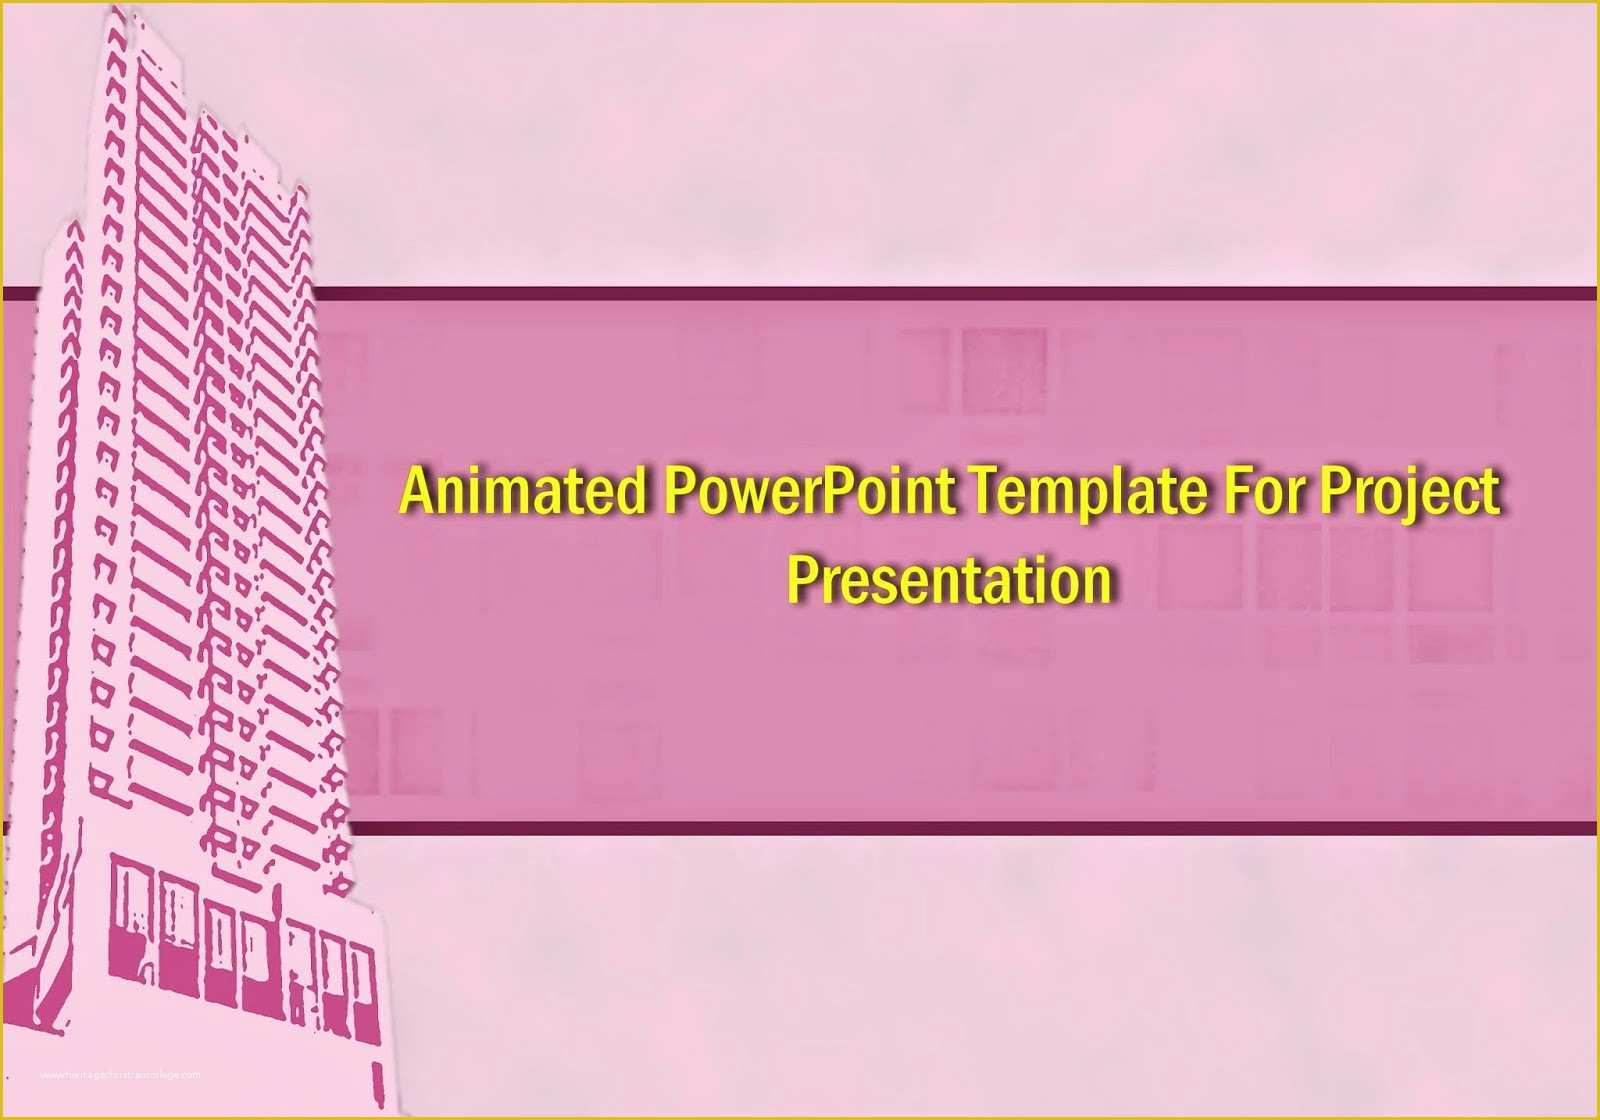 Professional Ppt Templates Free Download for Project Presentation Of Professional Animated Powerpoint Templates Free Download